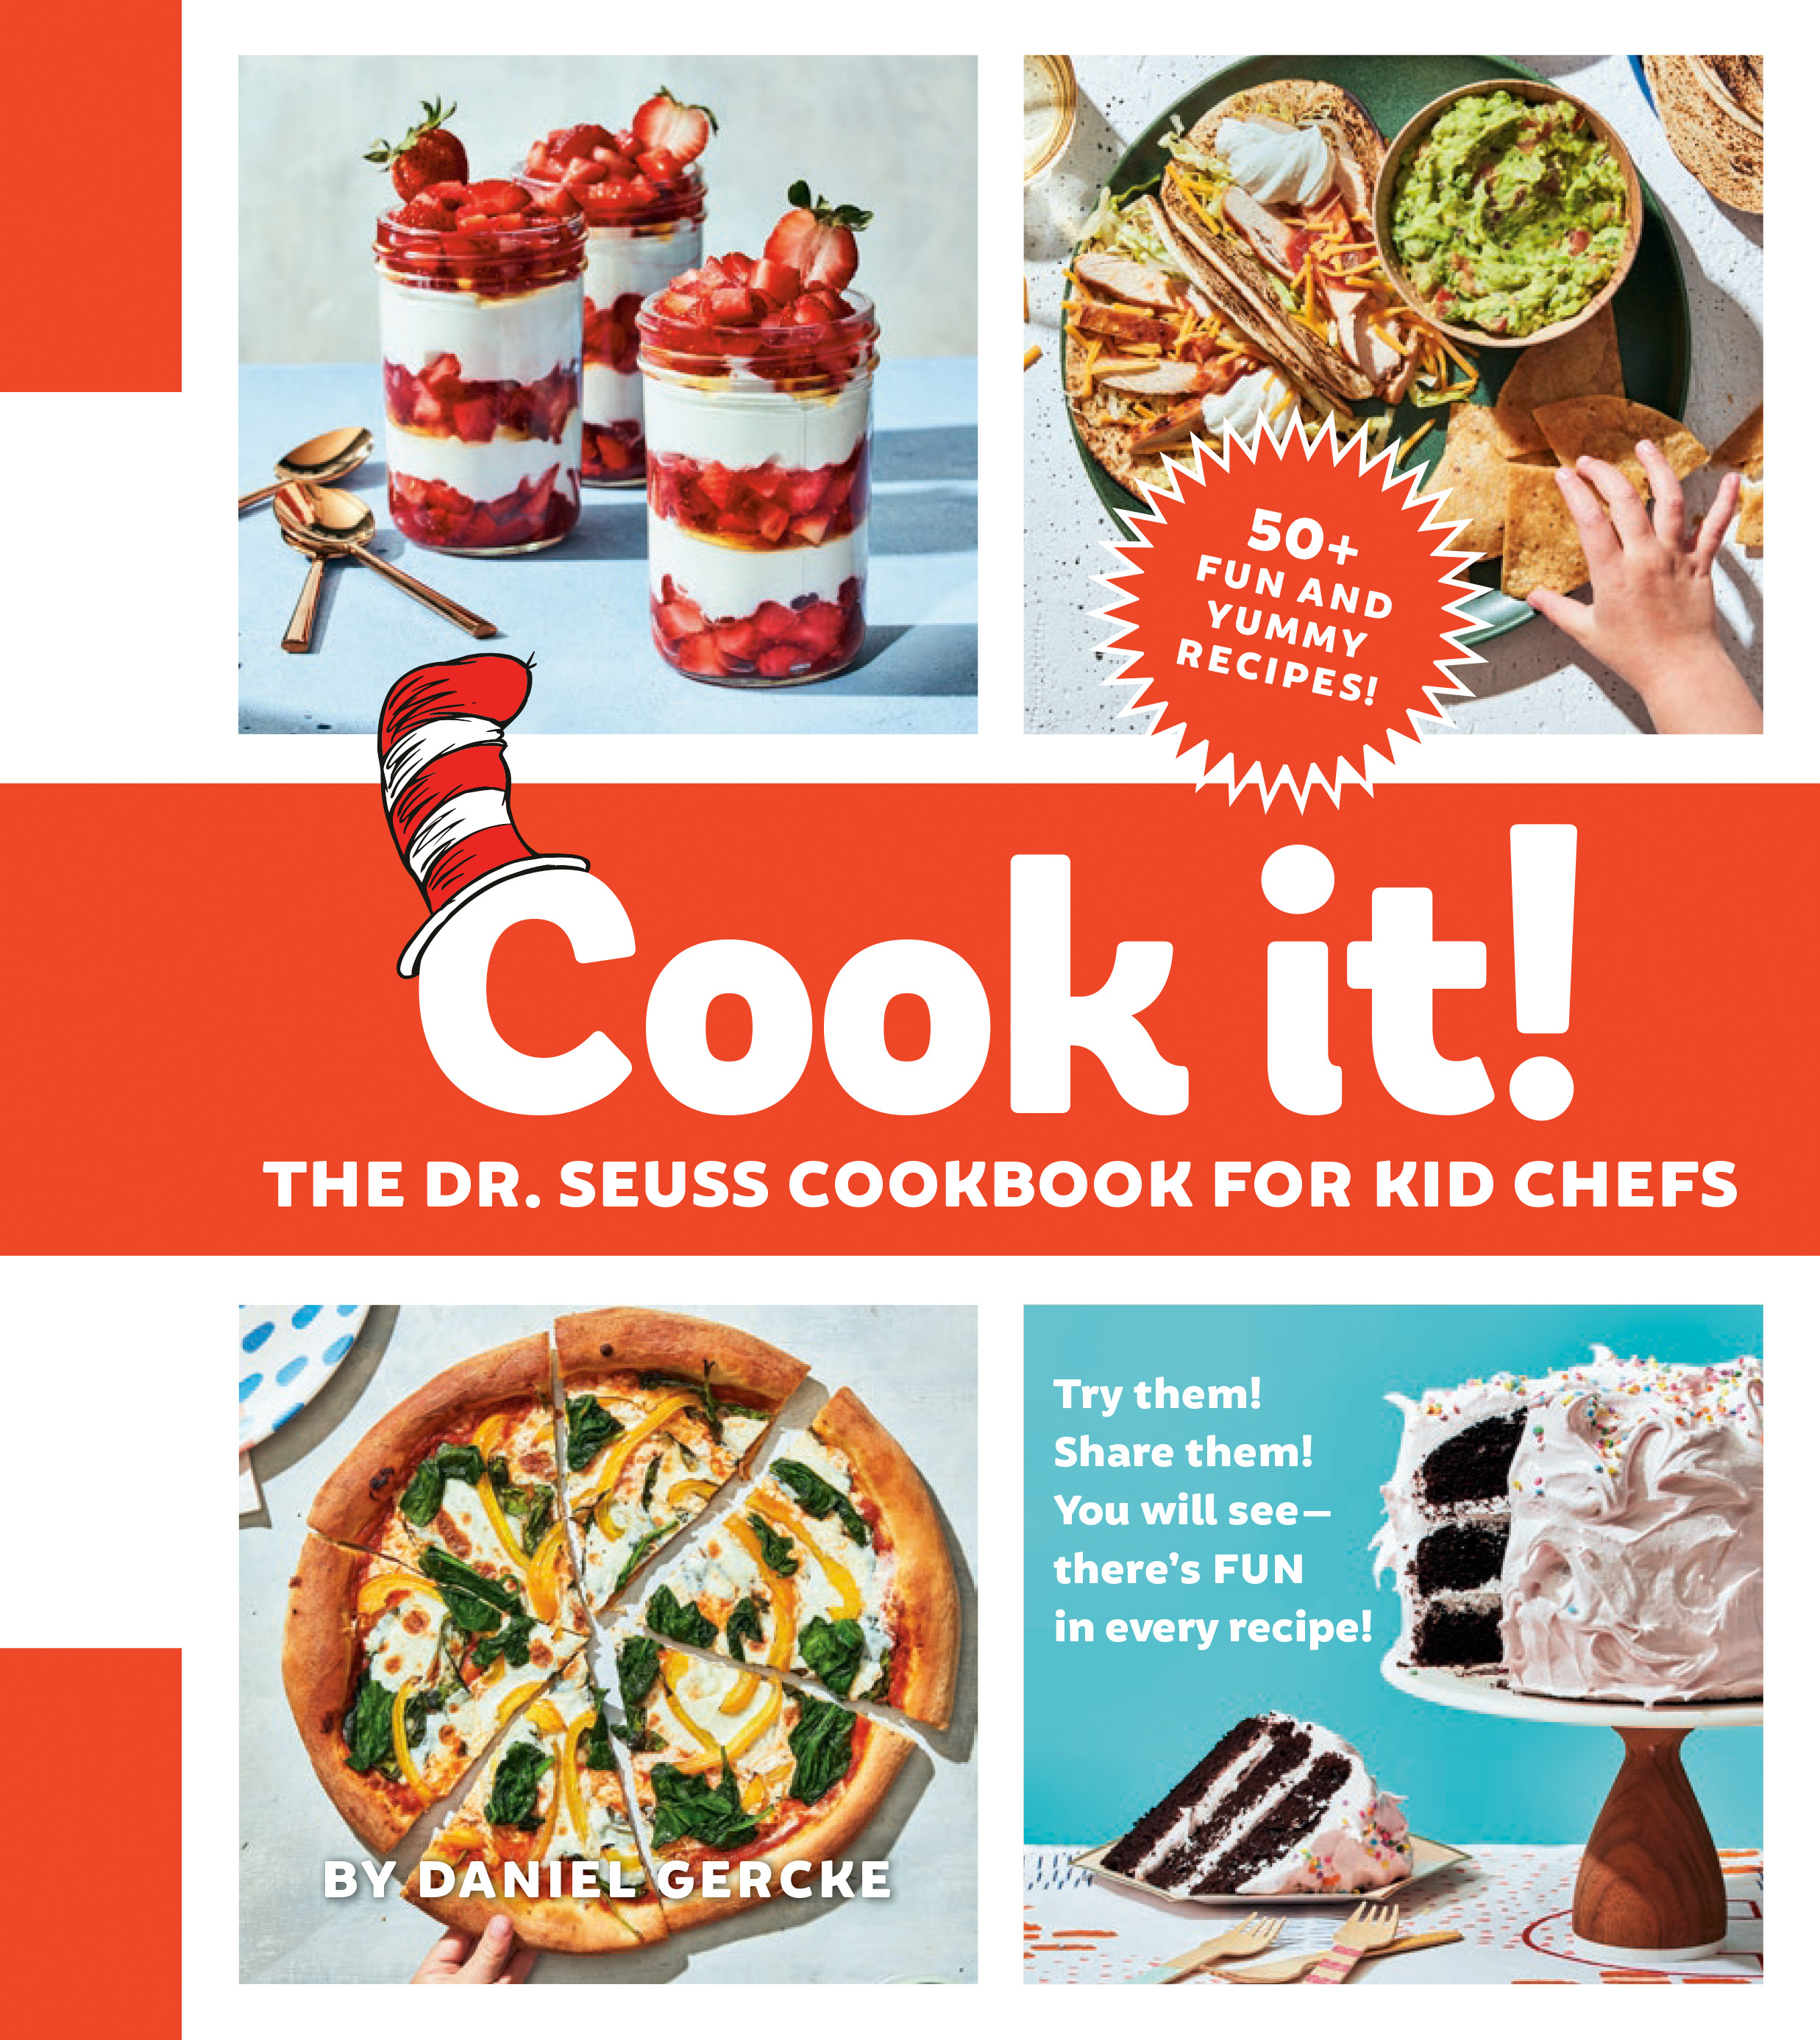 COOK IT! The Dr. Seuss Cookbook for Kid Chefs by Daniel Gercke